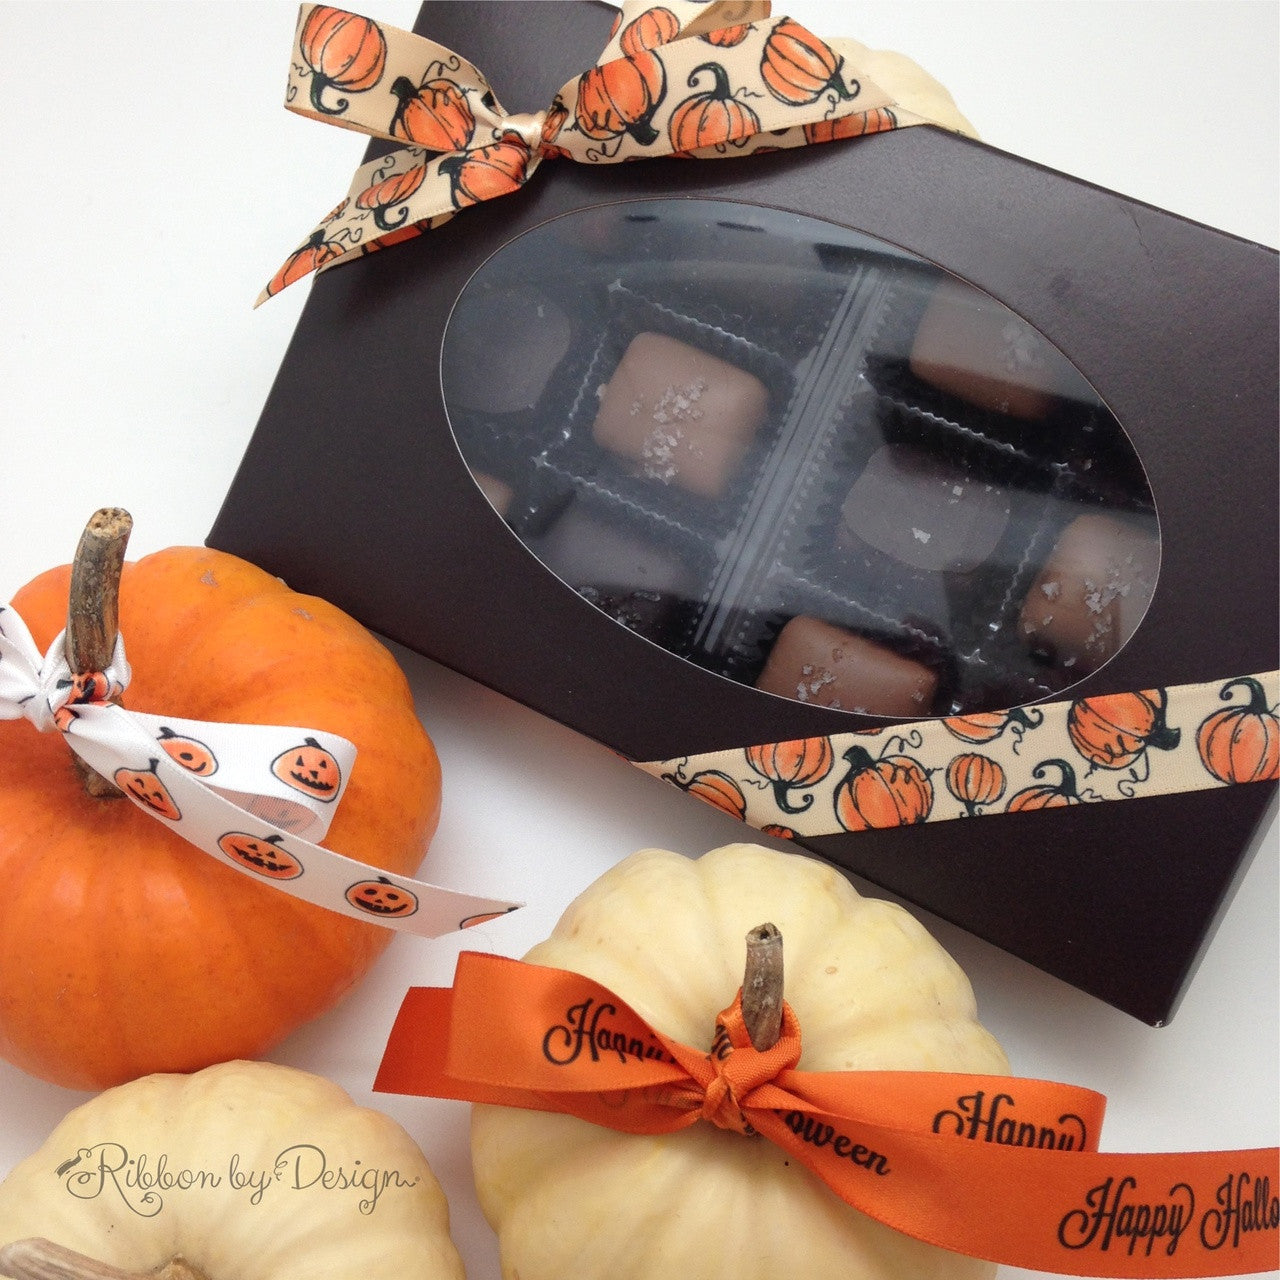 Add our ribbons to mini pumpkins or a box of chocolates for a fun Fall table design and gift!